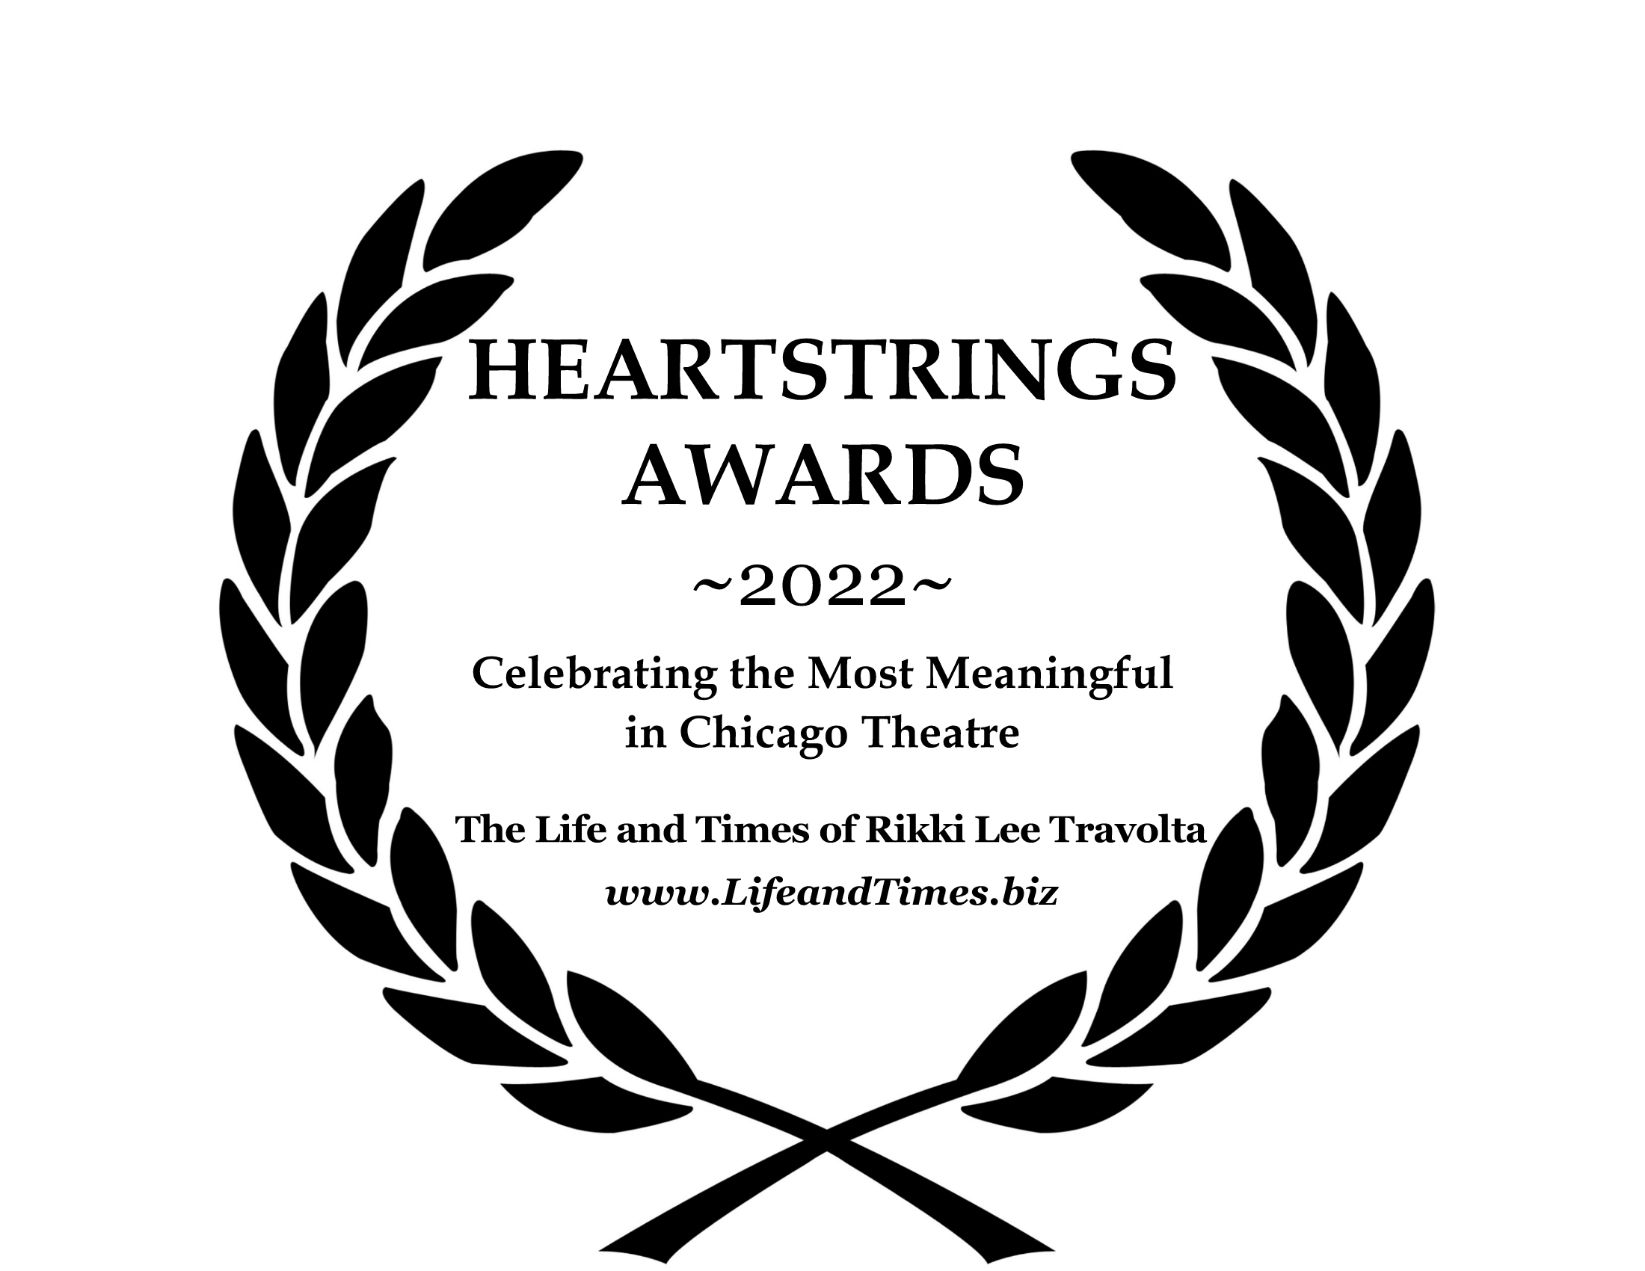 Heartstrings Awards Celebrate the Most Meaningful Chicago Theatre